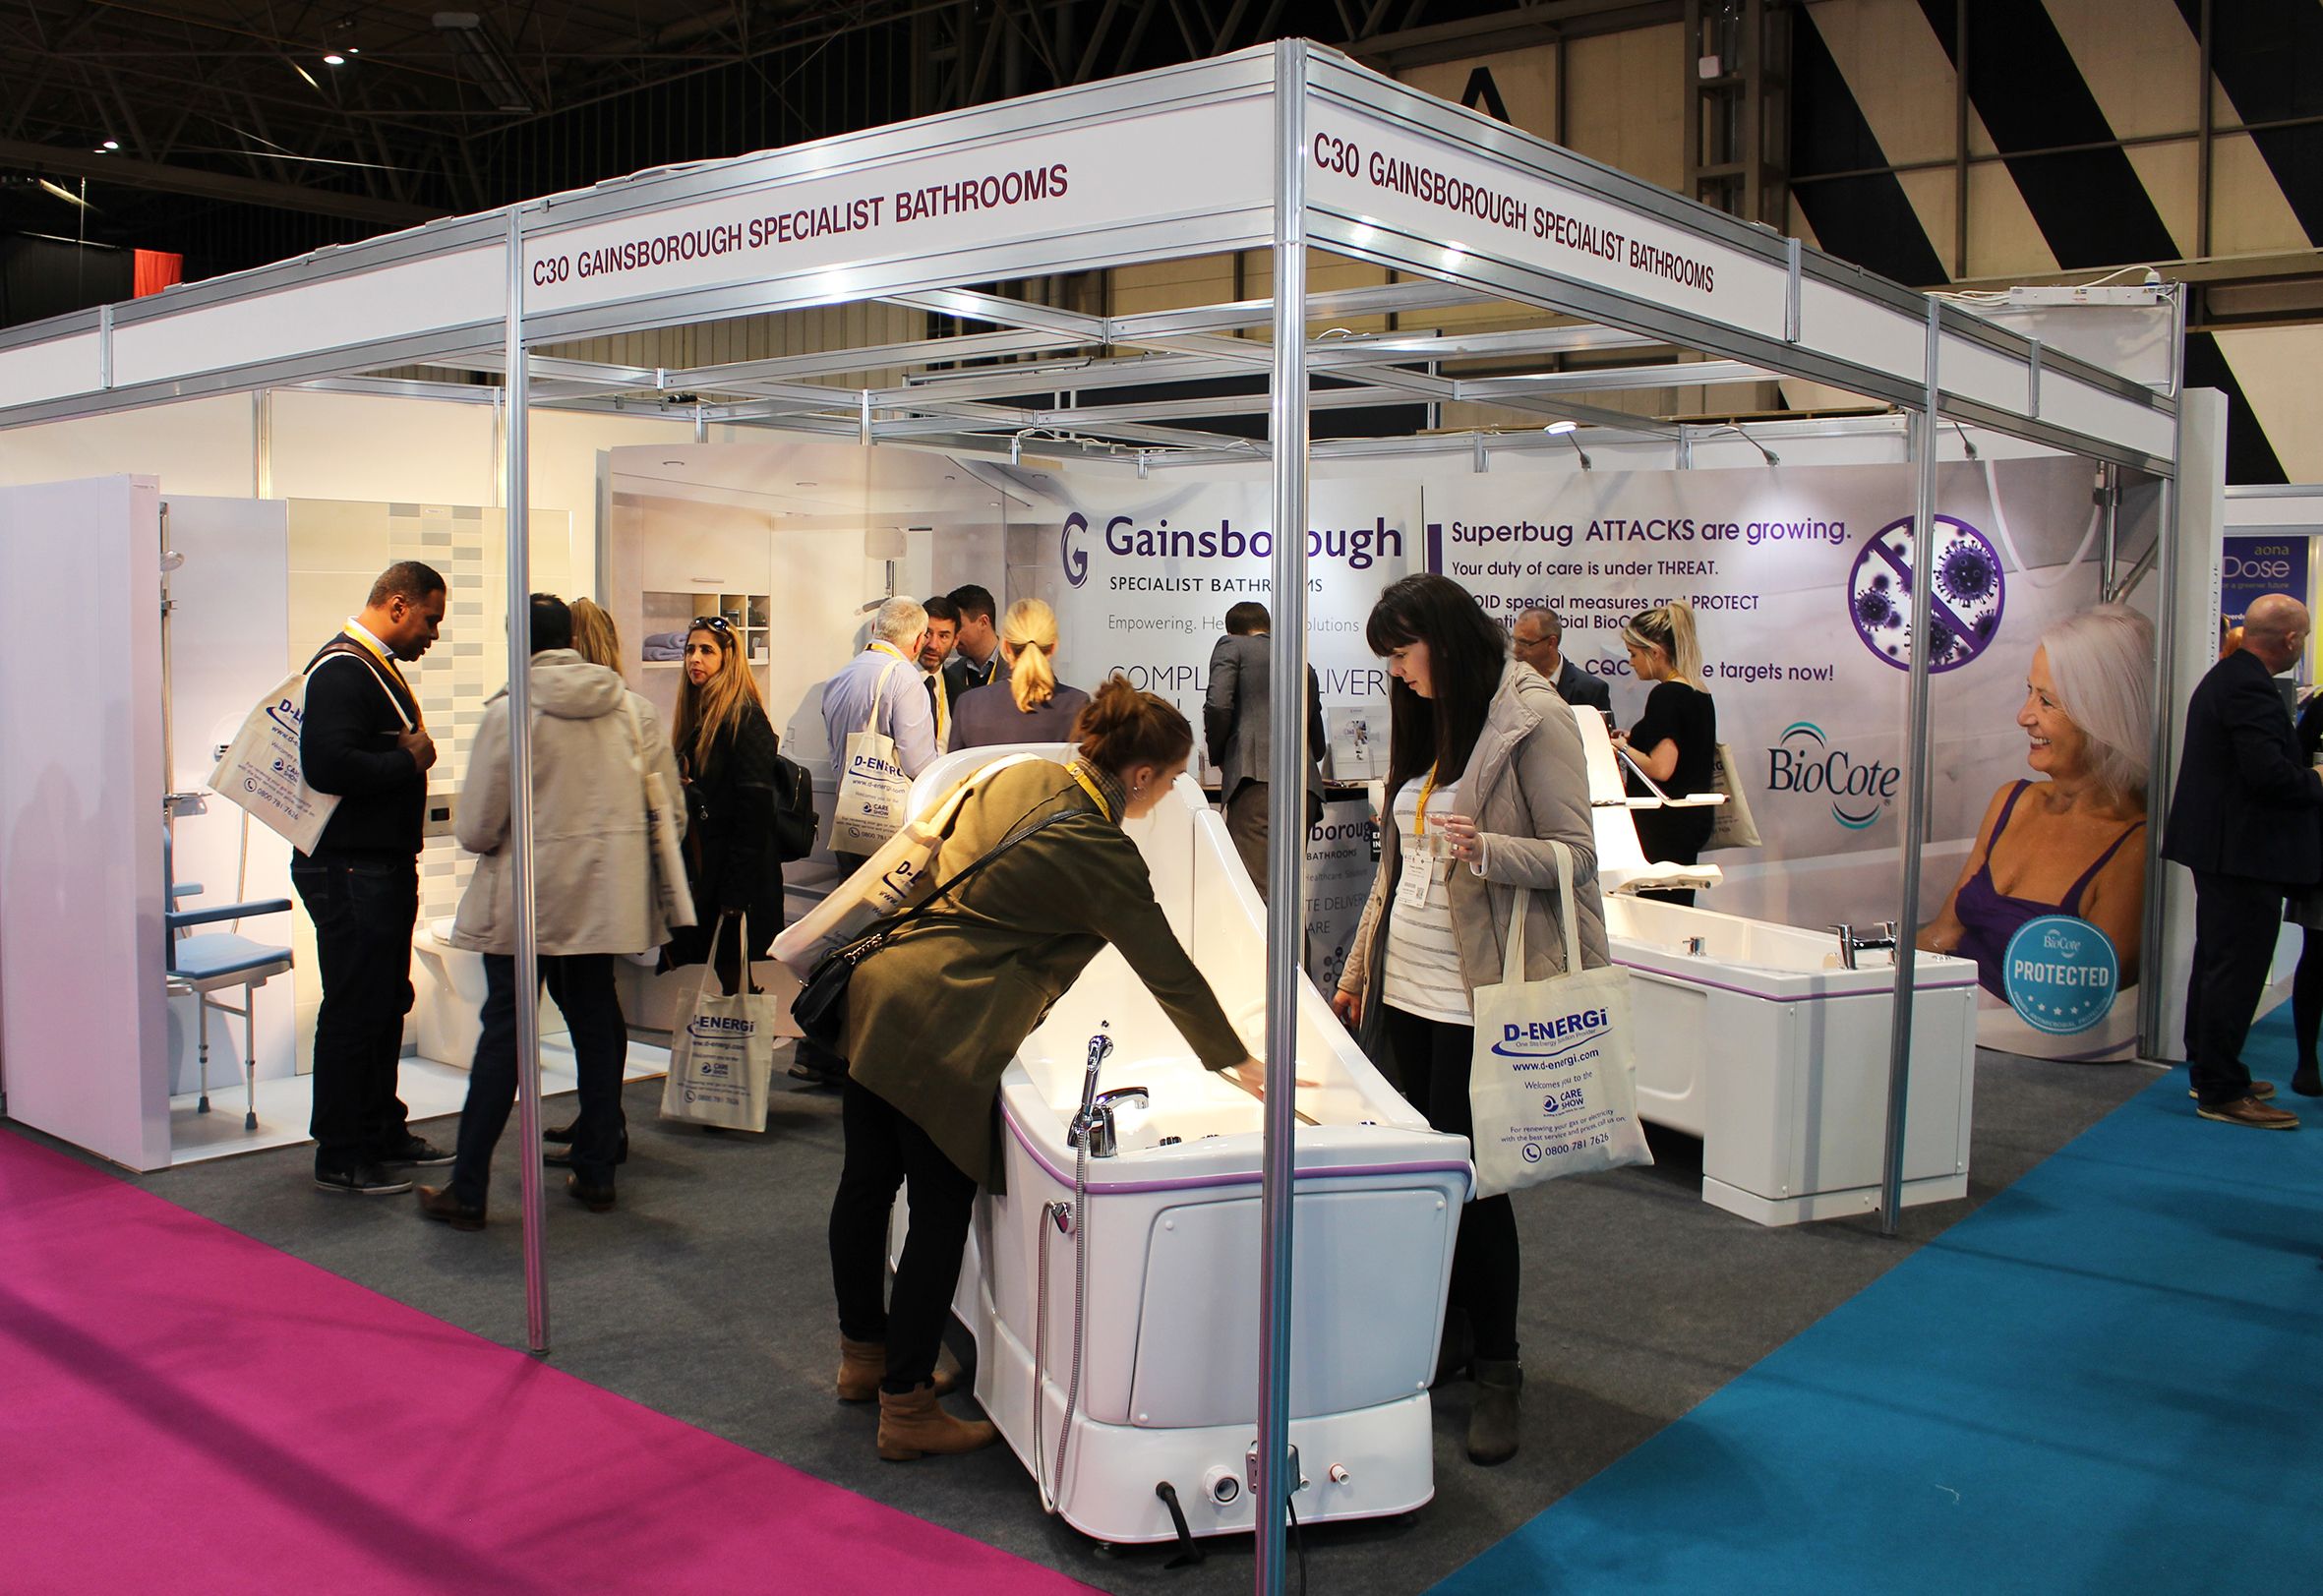 Gainsborough Specialist Bathrooms to deliver unparalleled holistic showcase at Care Show 2021